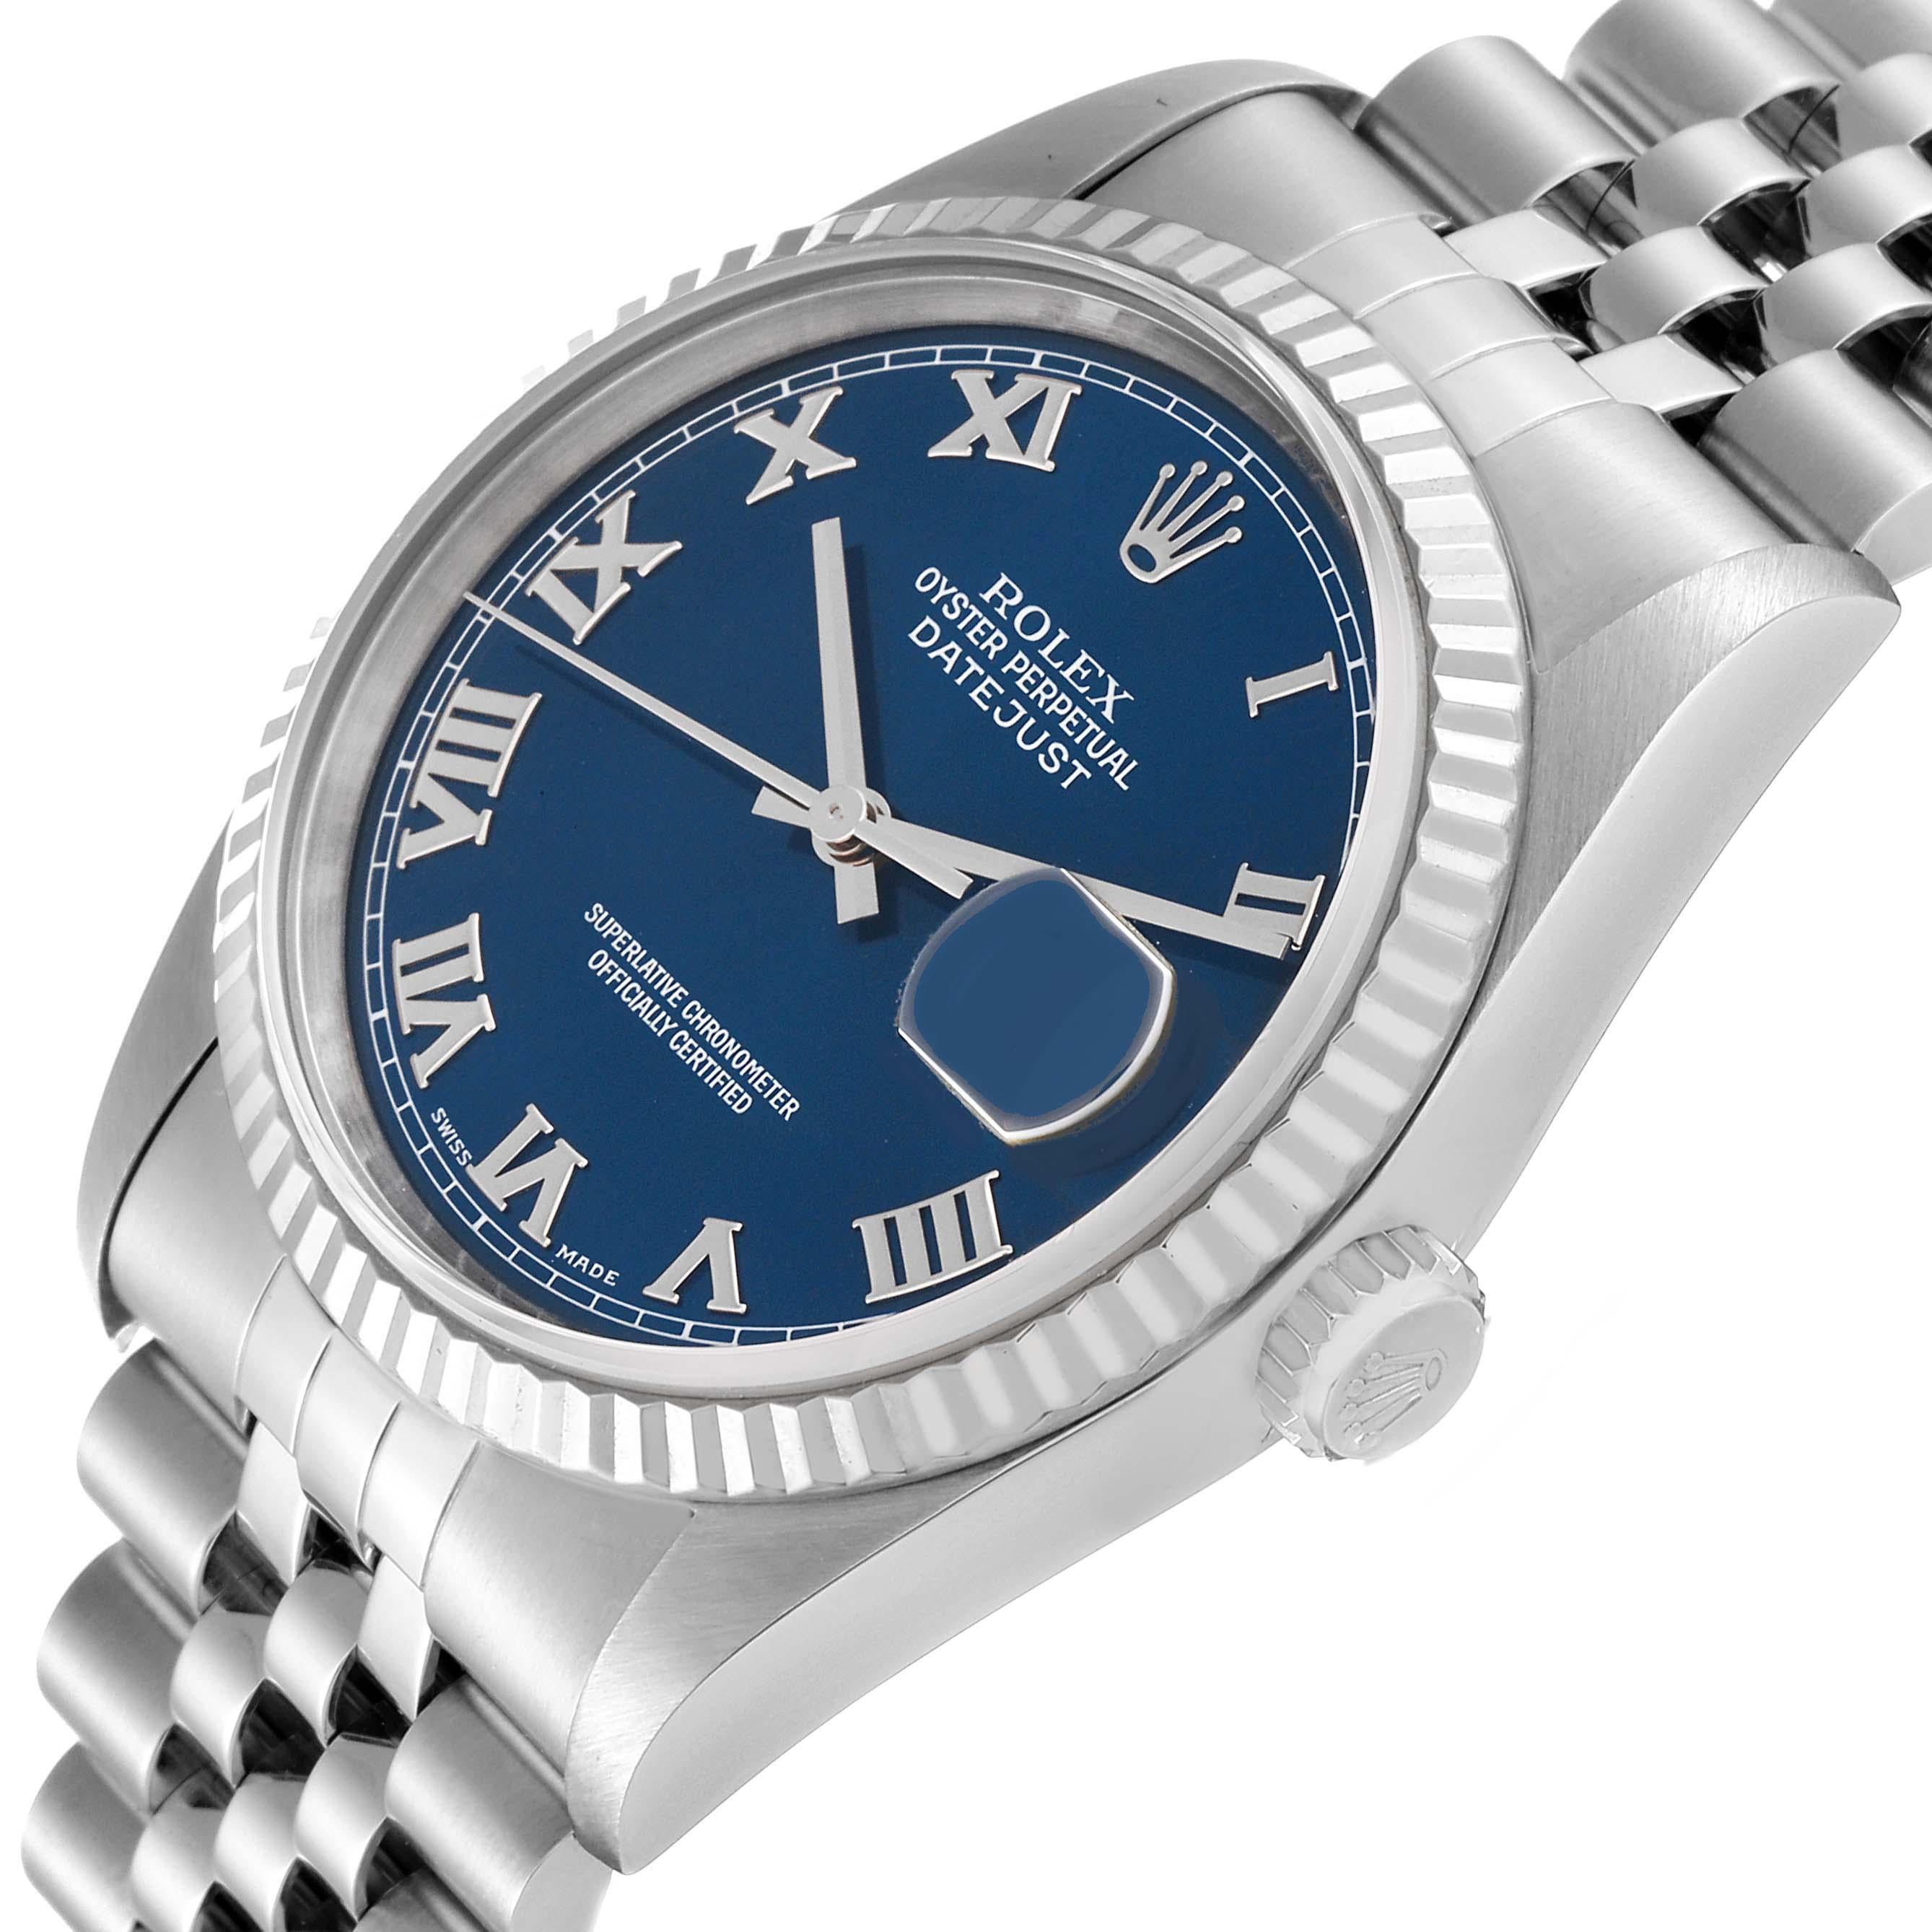 Rolex Datejust Blue Roman Dial Steel White Gold Mens Watch 16234. Officially certified chronometer automatic self-winding movement. Stainless steel oyster case 36 mm in diameter. Rolex logo on the crown. 18k white gold fluted bezel. Scratch